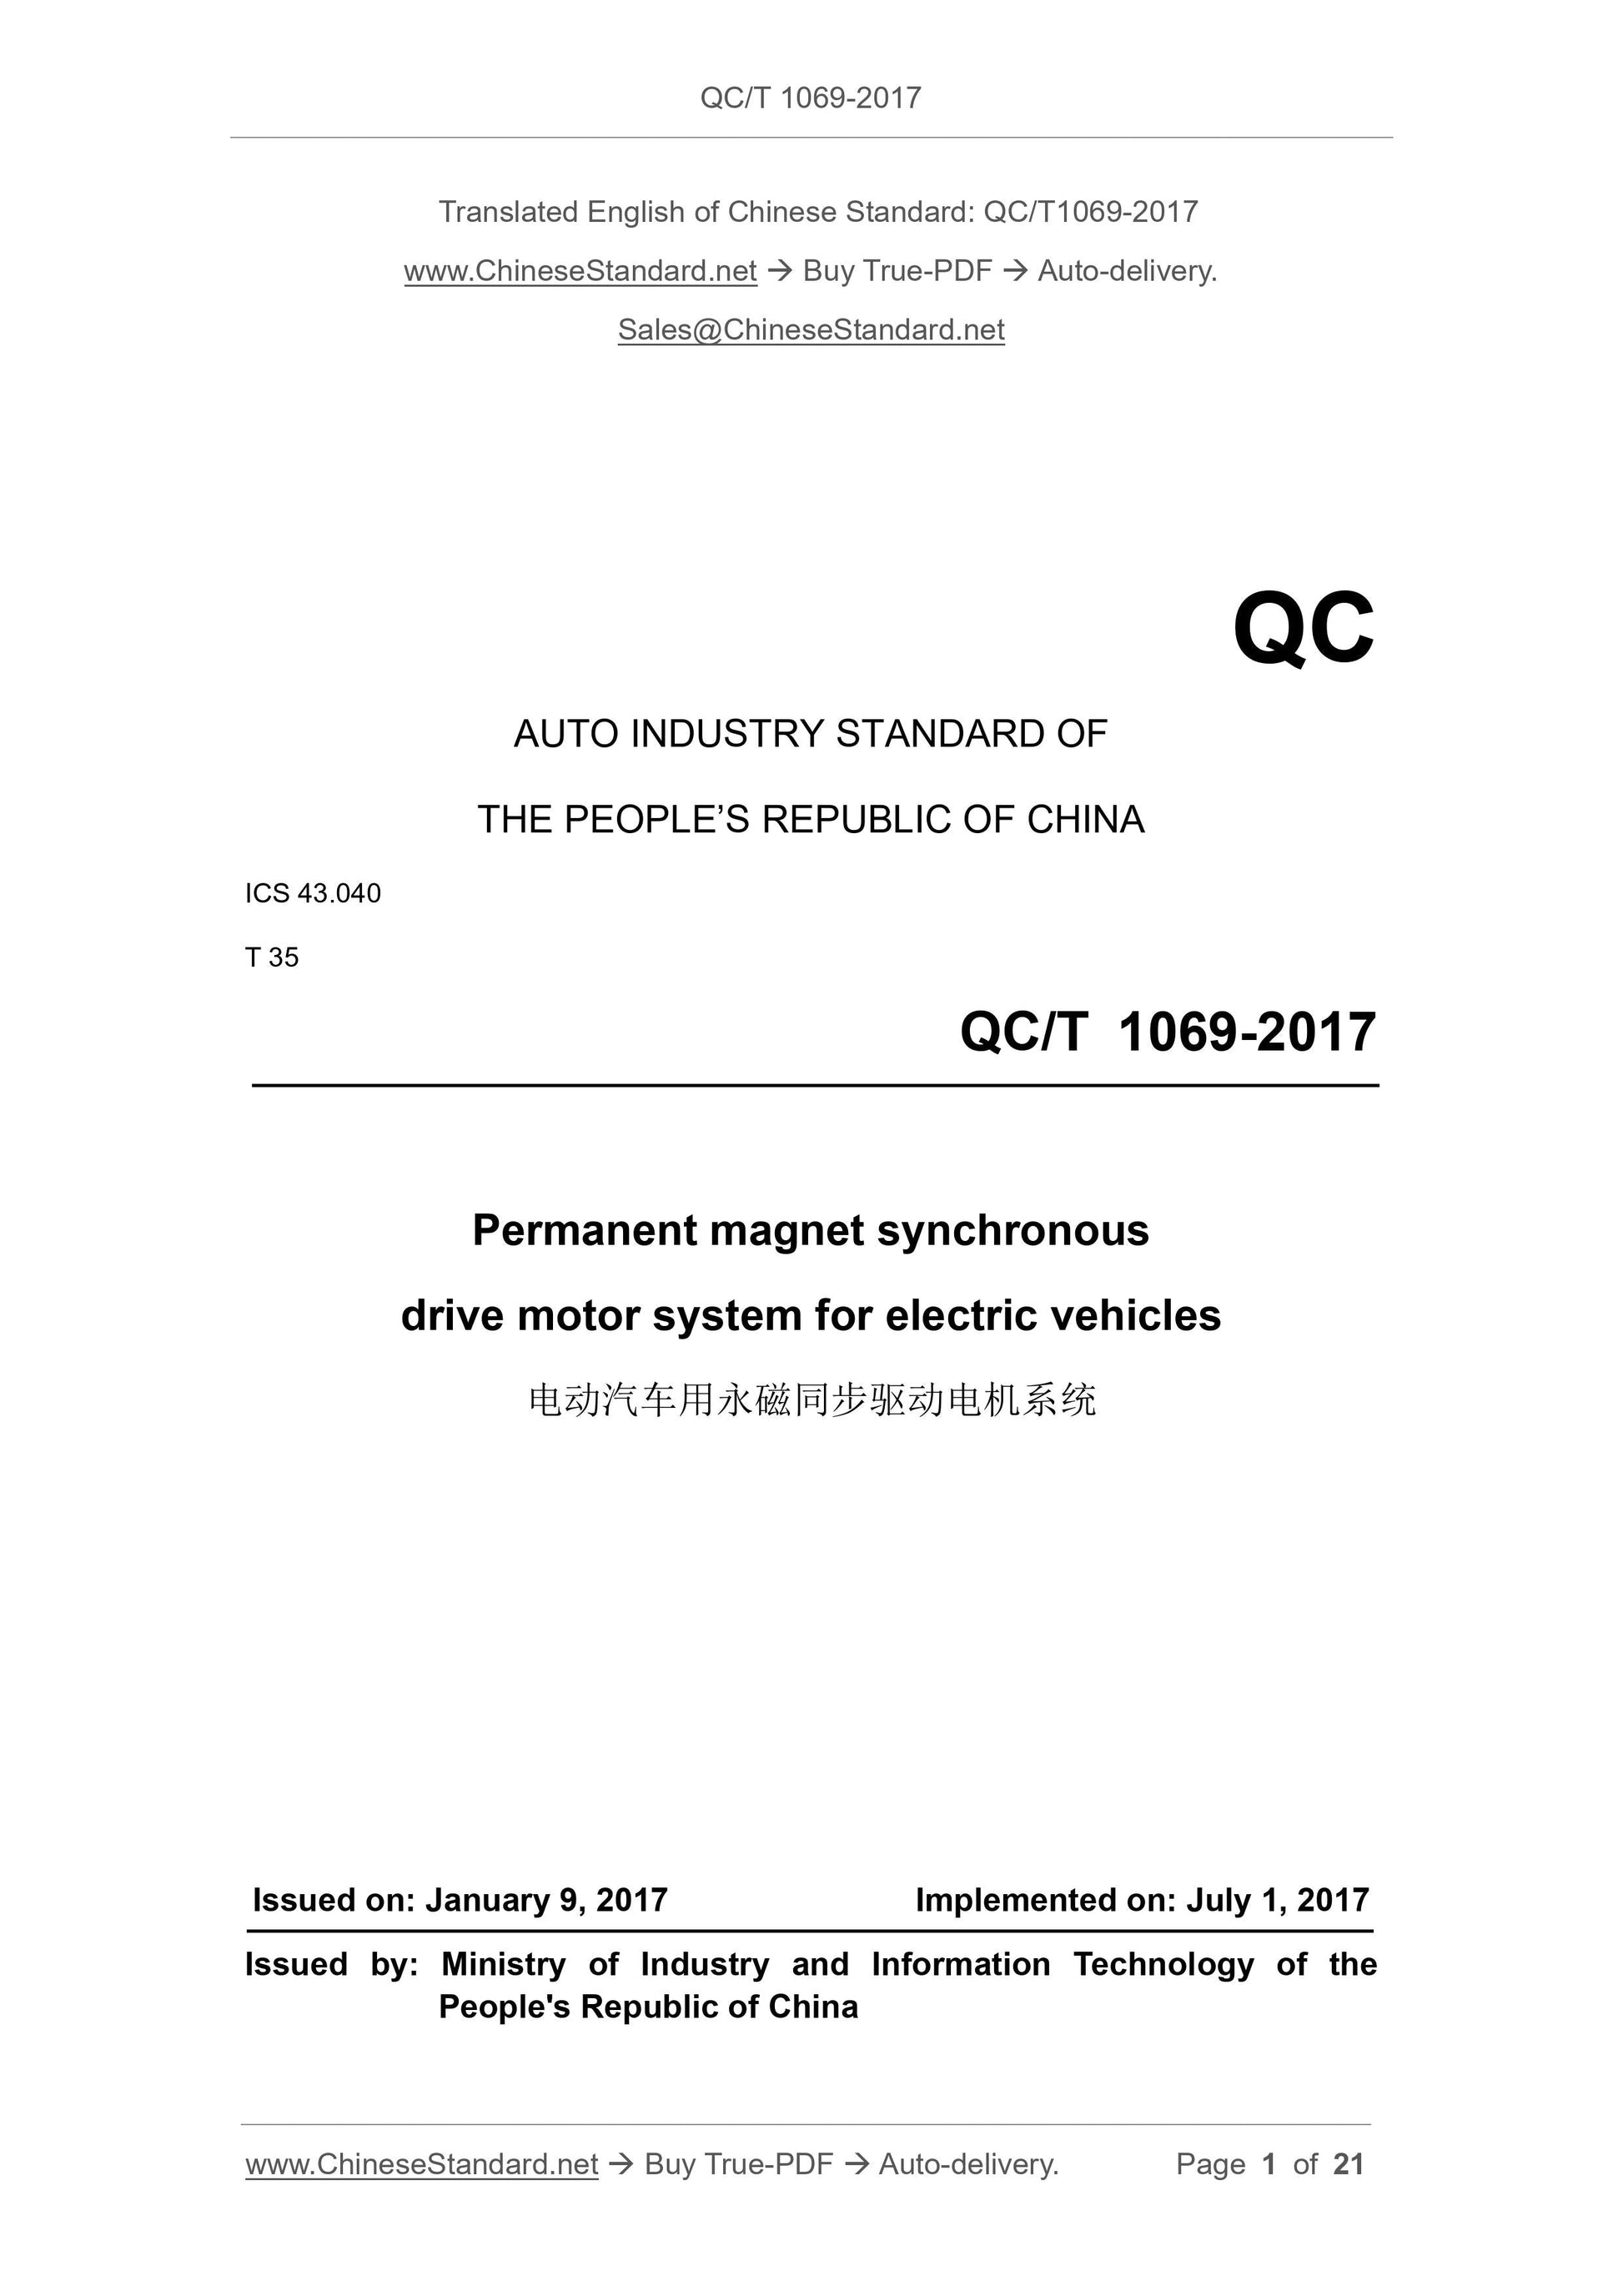 QC/T 1069-2017 Page 1